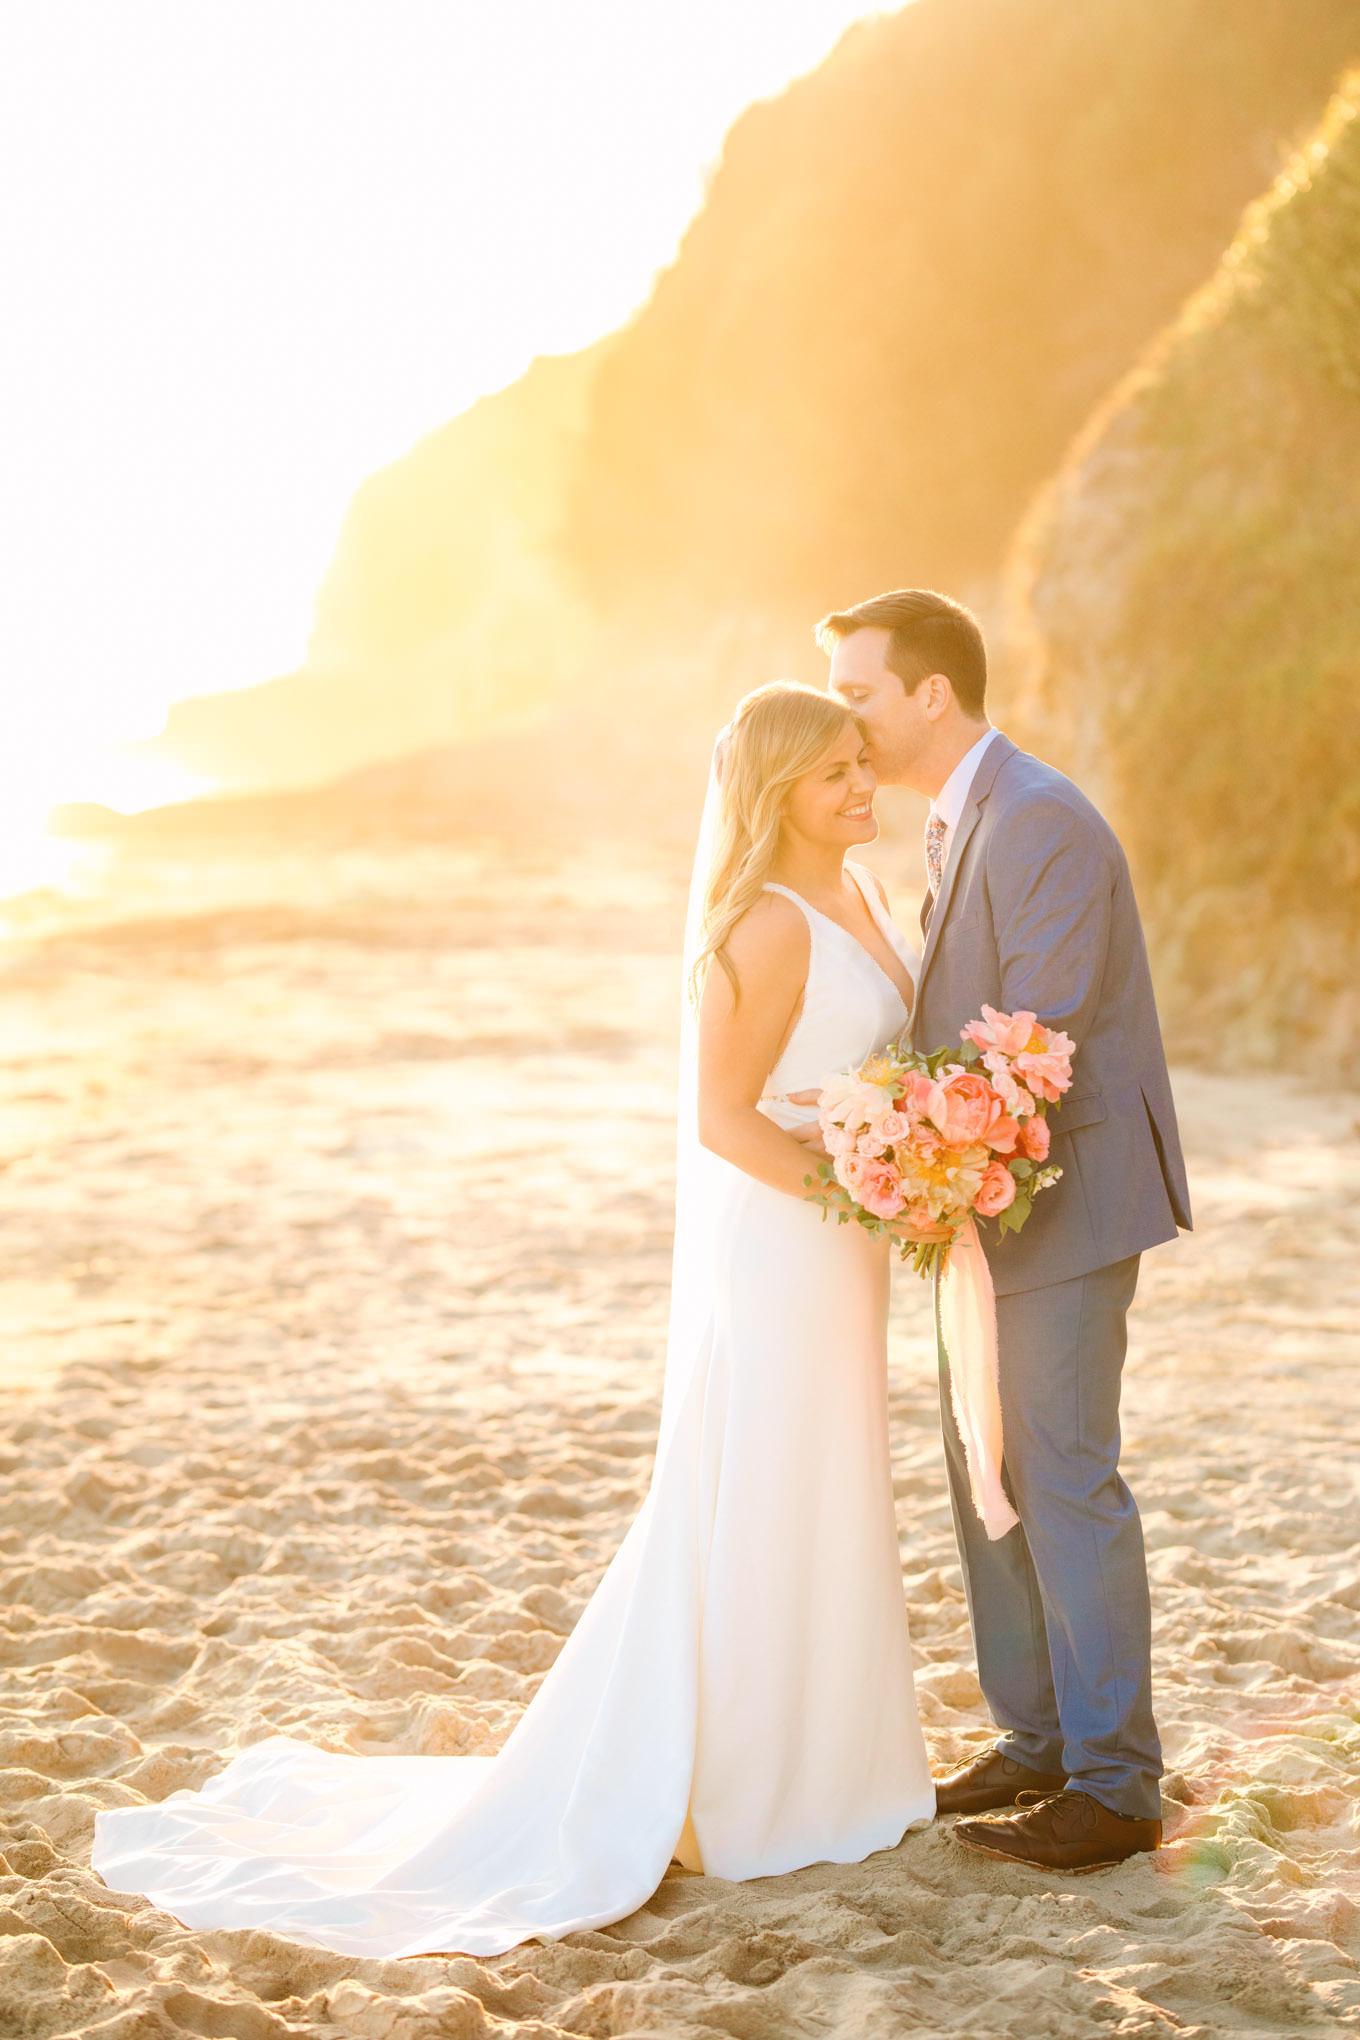 Santa Barbara El Capitan Beach elopement | Engagement, elopement, and wedding photography roundup of Mary Costa’s favorite images from 2020 | Colorful and elevated photography for fun-loving couples in Southern California | #2020wedding #elopement #weddingphoto #weddingphotography   Source: Mary Costa Photography | Los Angeles